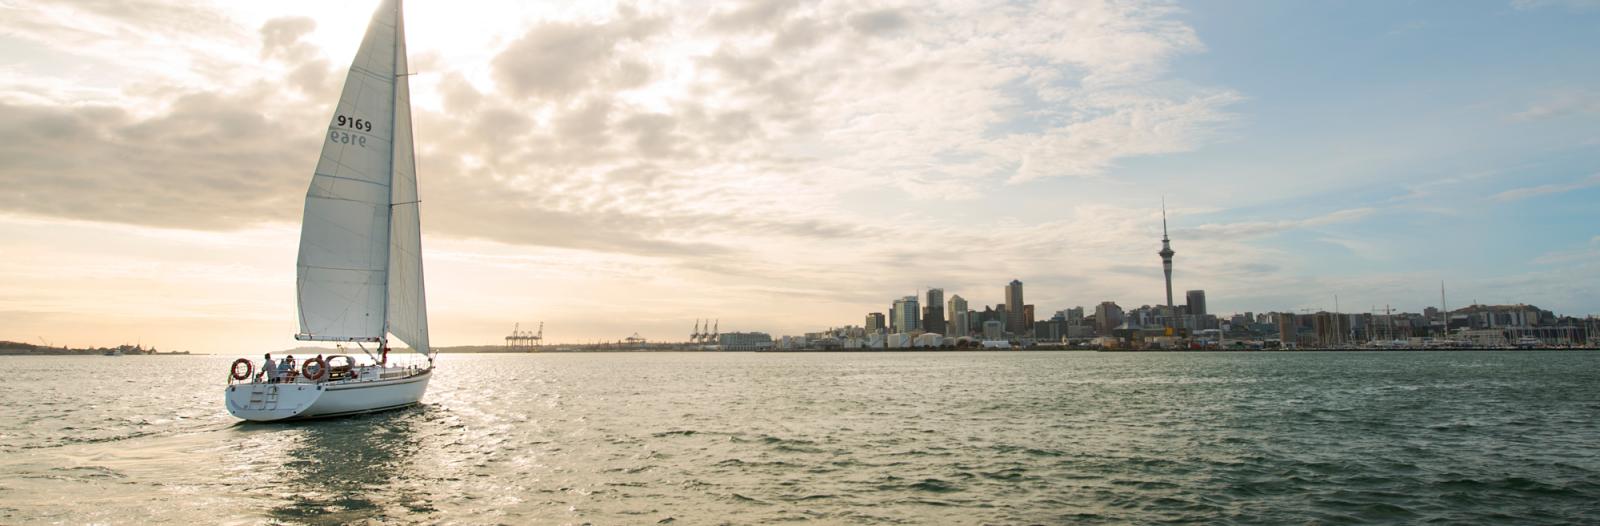 Auckland - The City of Sails